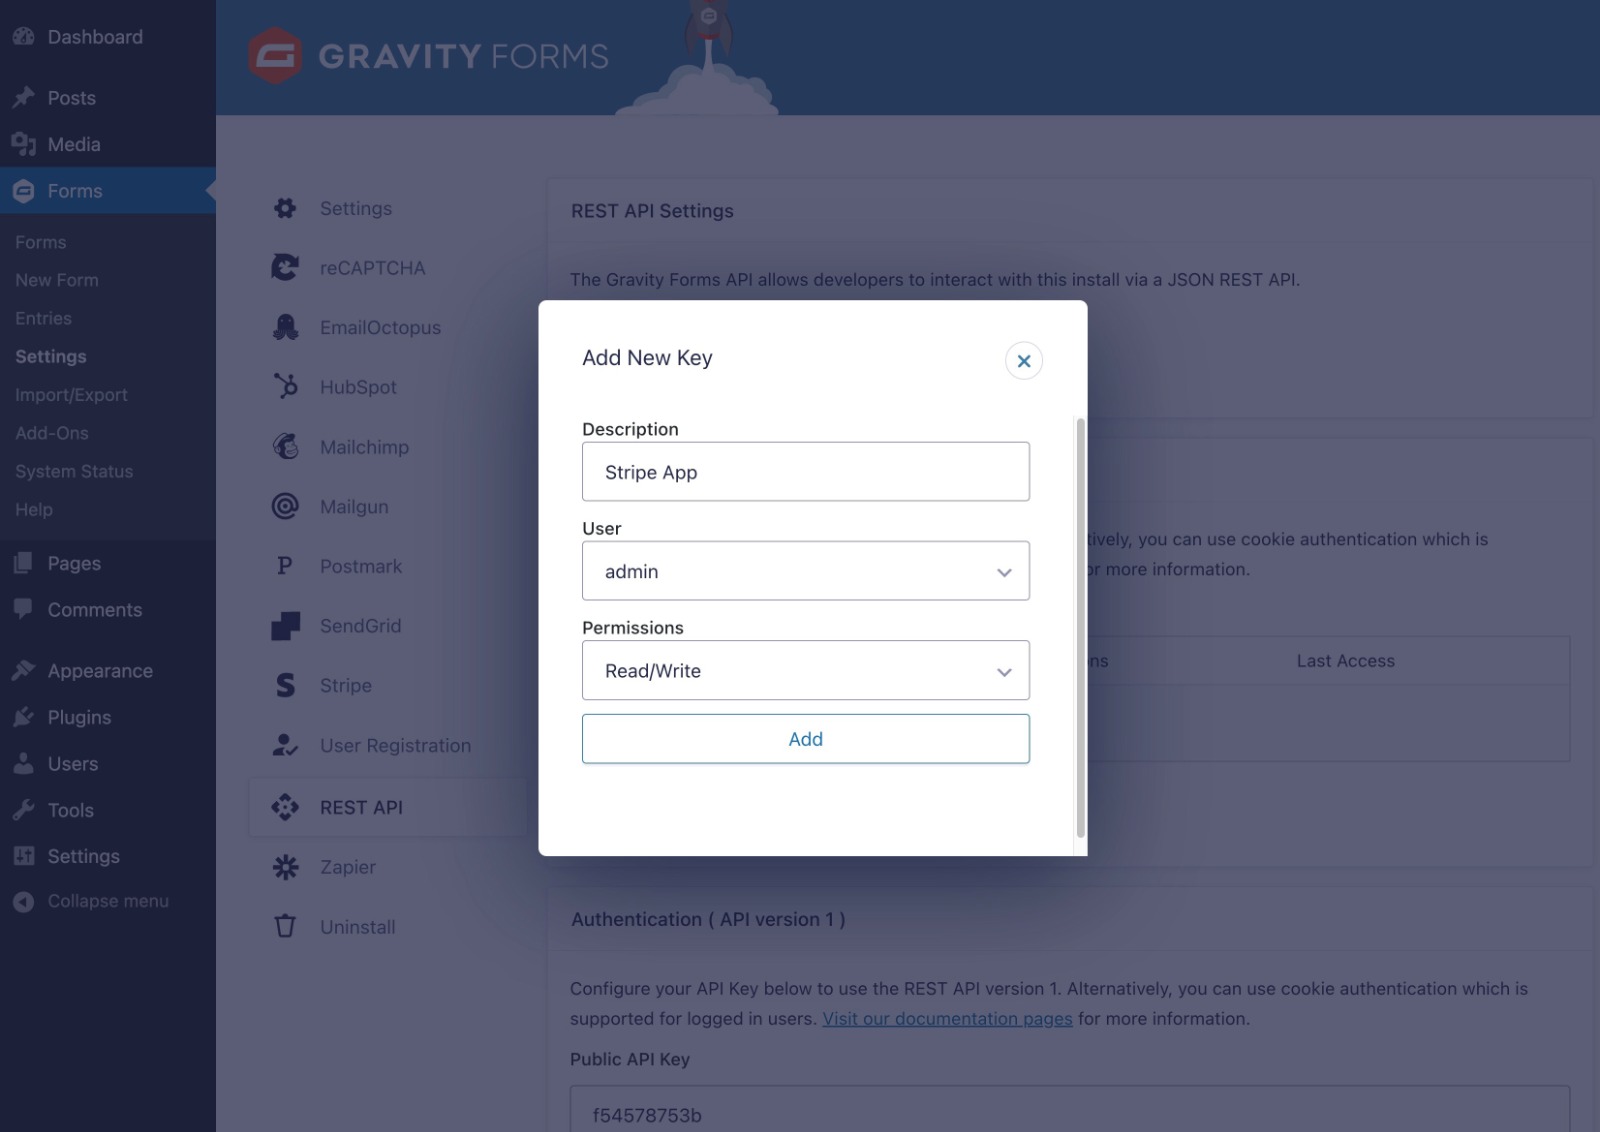 Configuring the Gravity Forms API key for the Stripe app